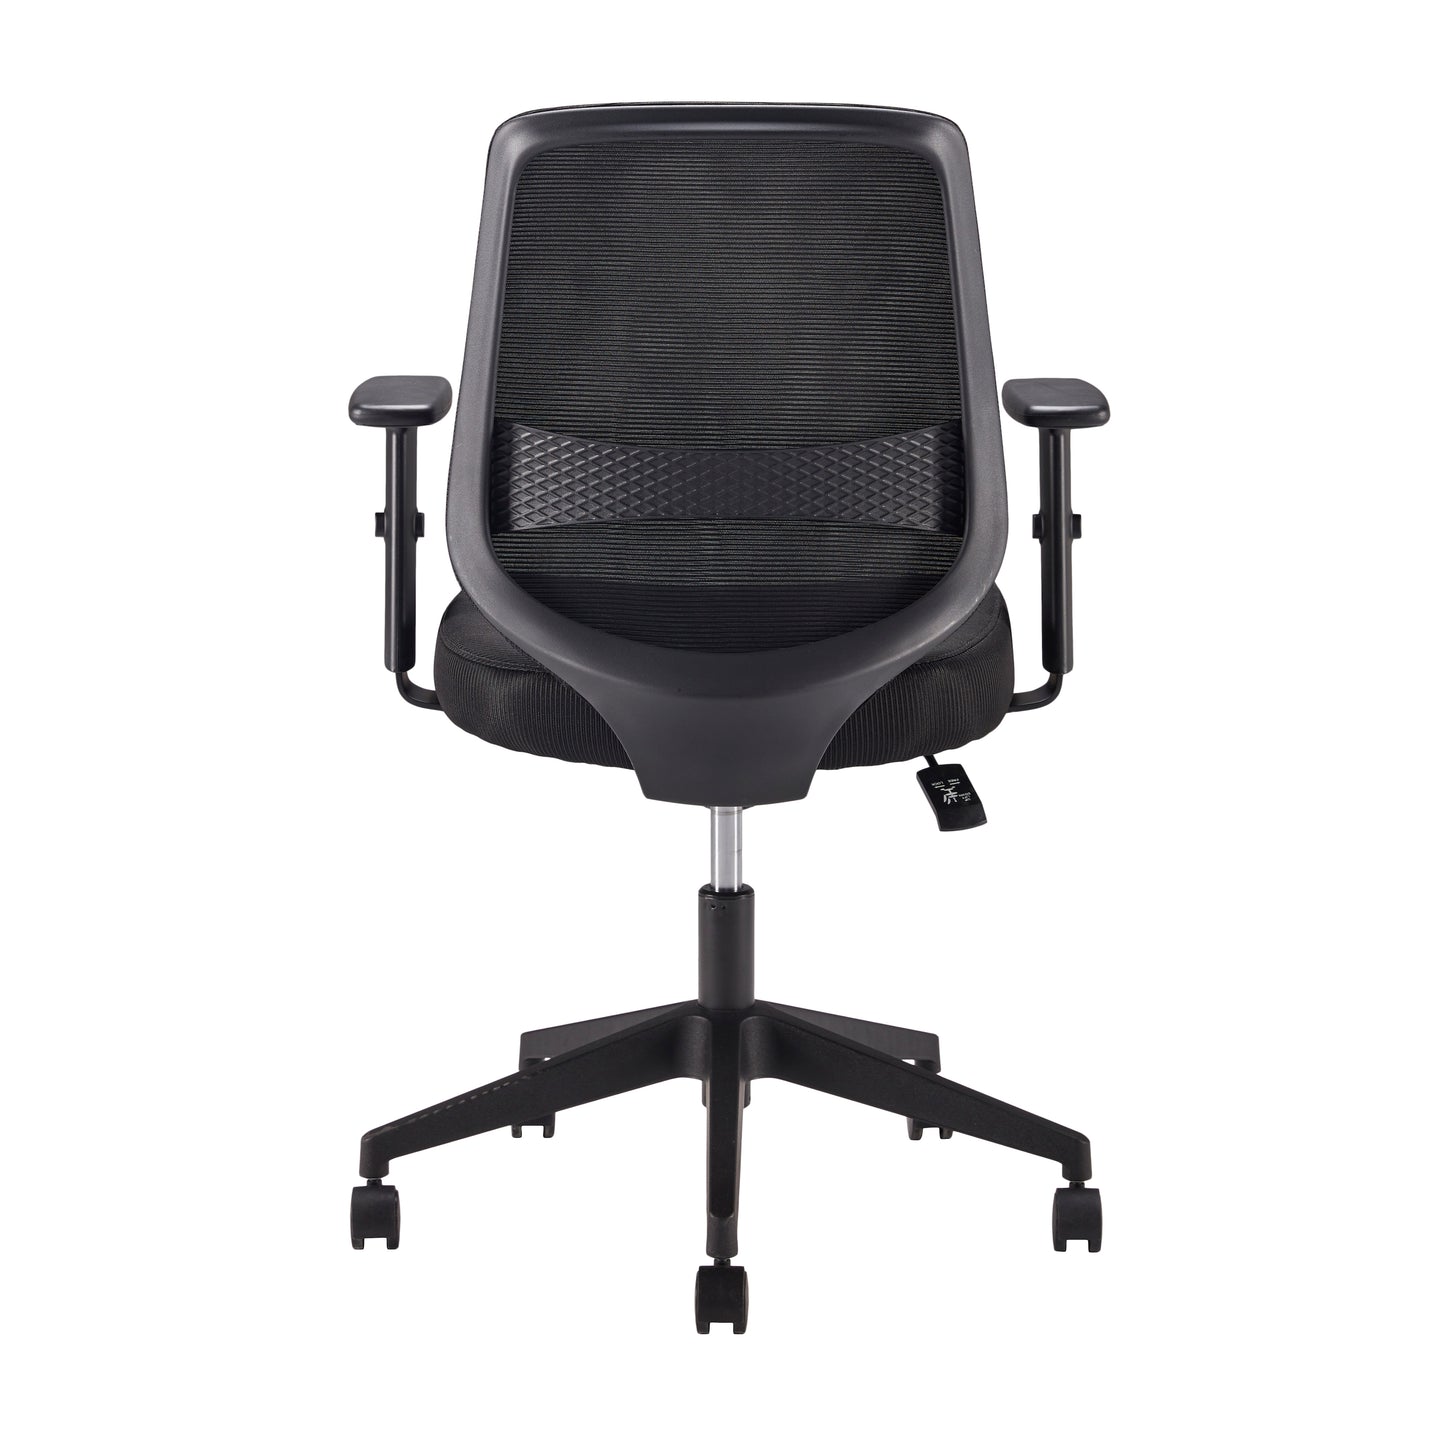 Shield Office Chair - Task Chair | Tollo.co.uk  